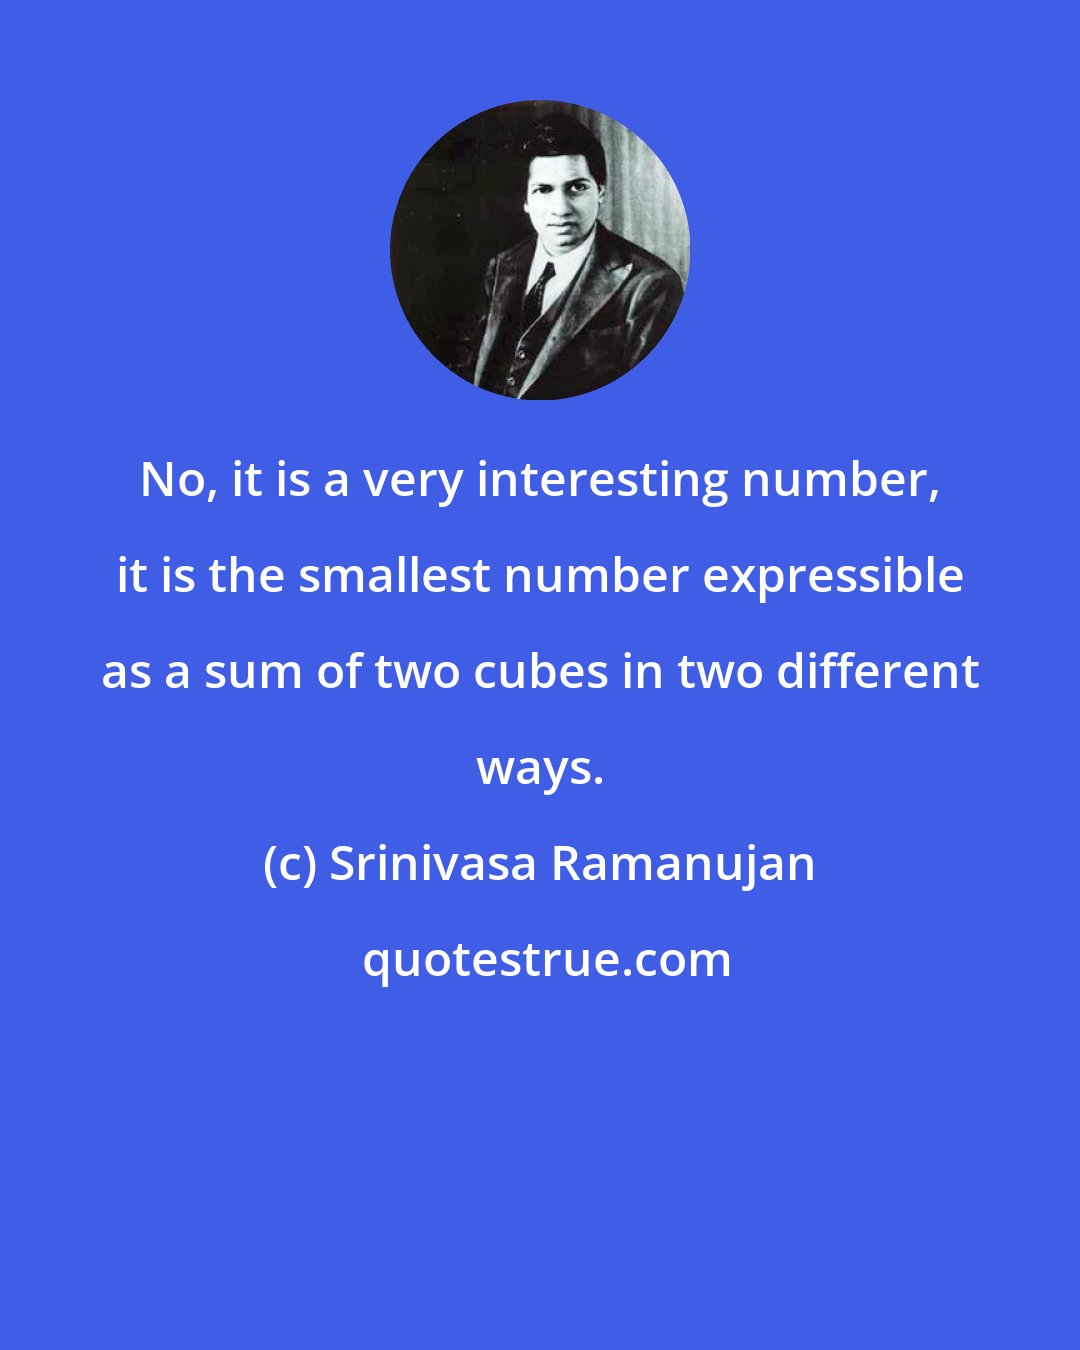 Srinivasa Ramanujan: No, it is a very interesting number, it is the smallest number expressible as a sum of two cubes in two different ways.